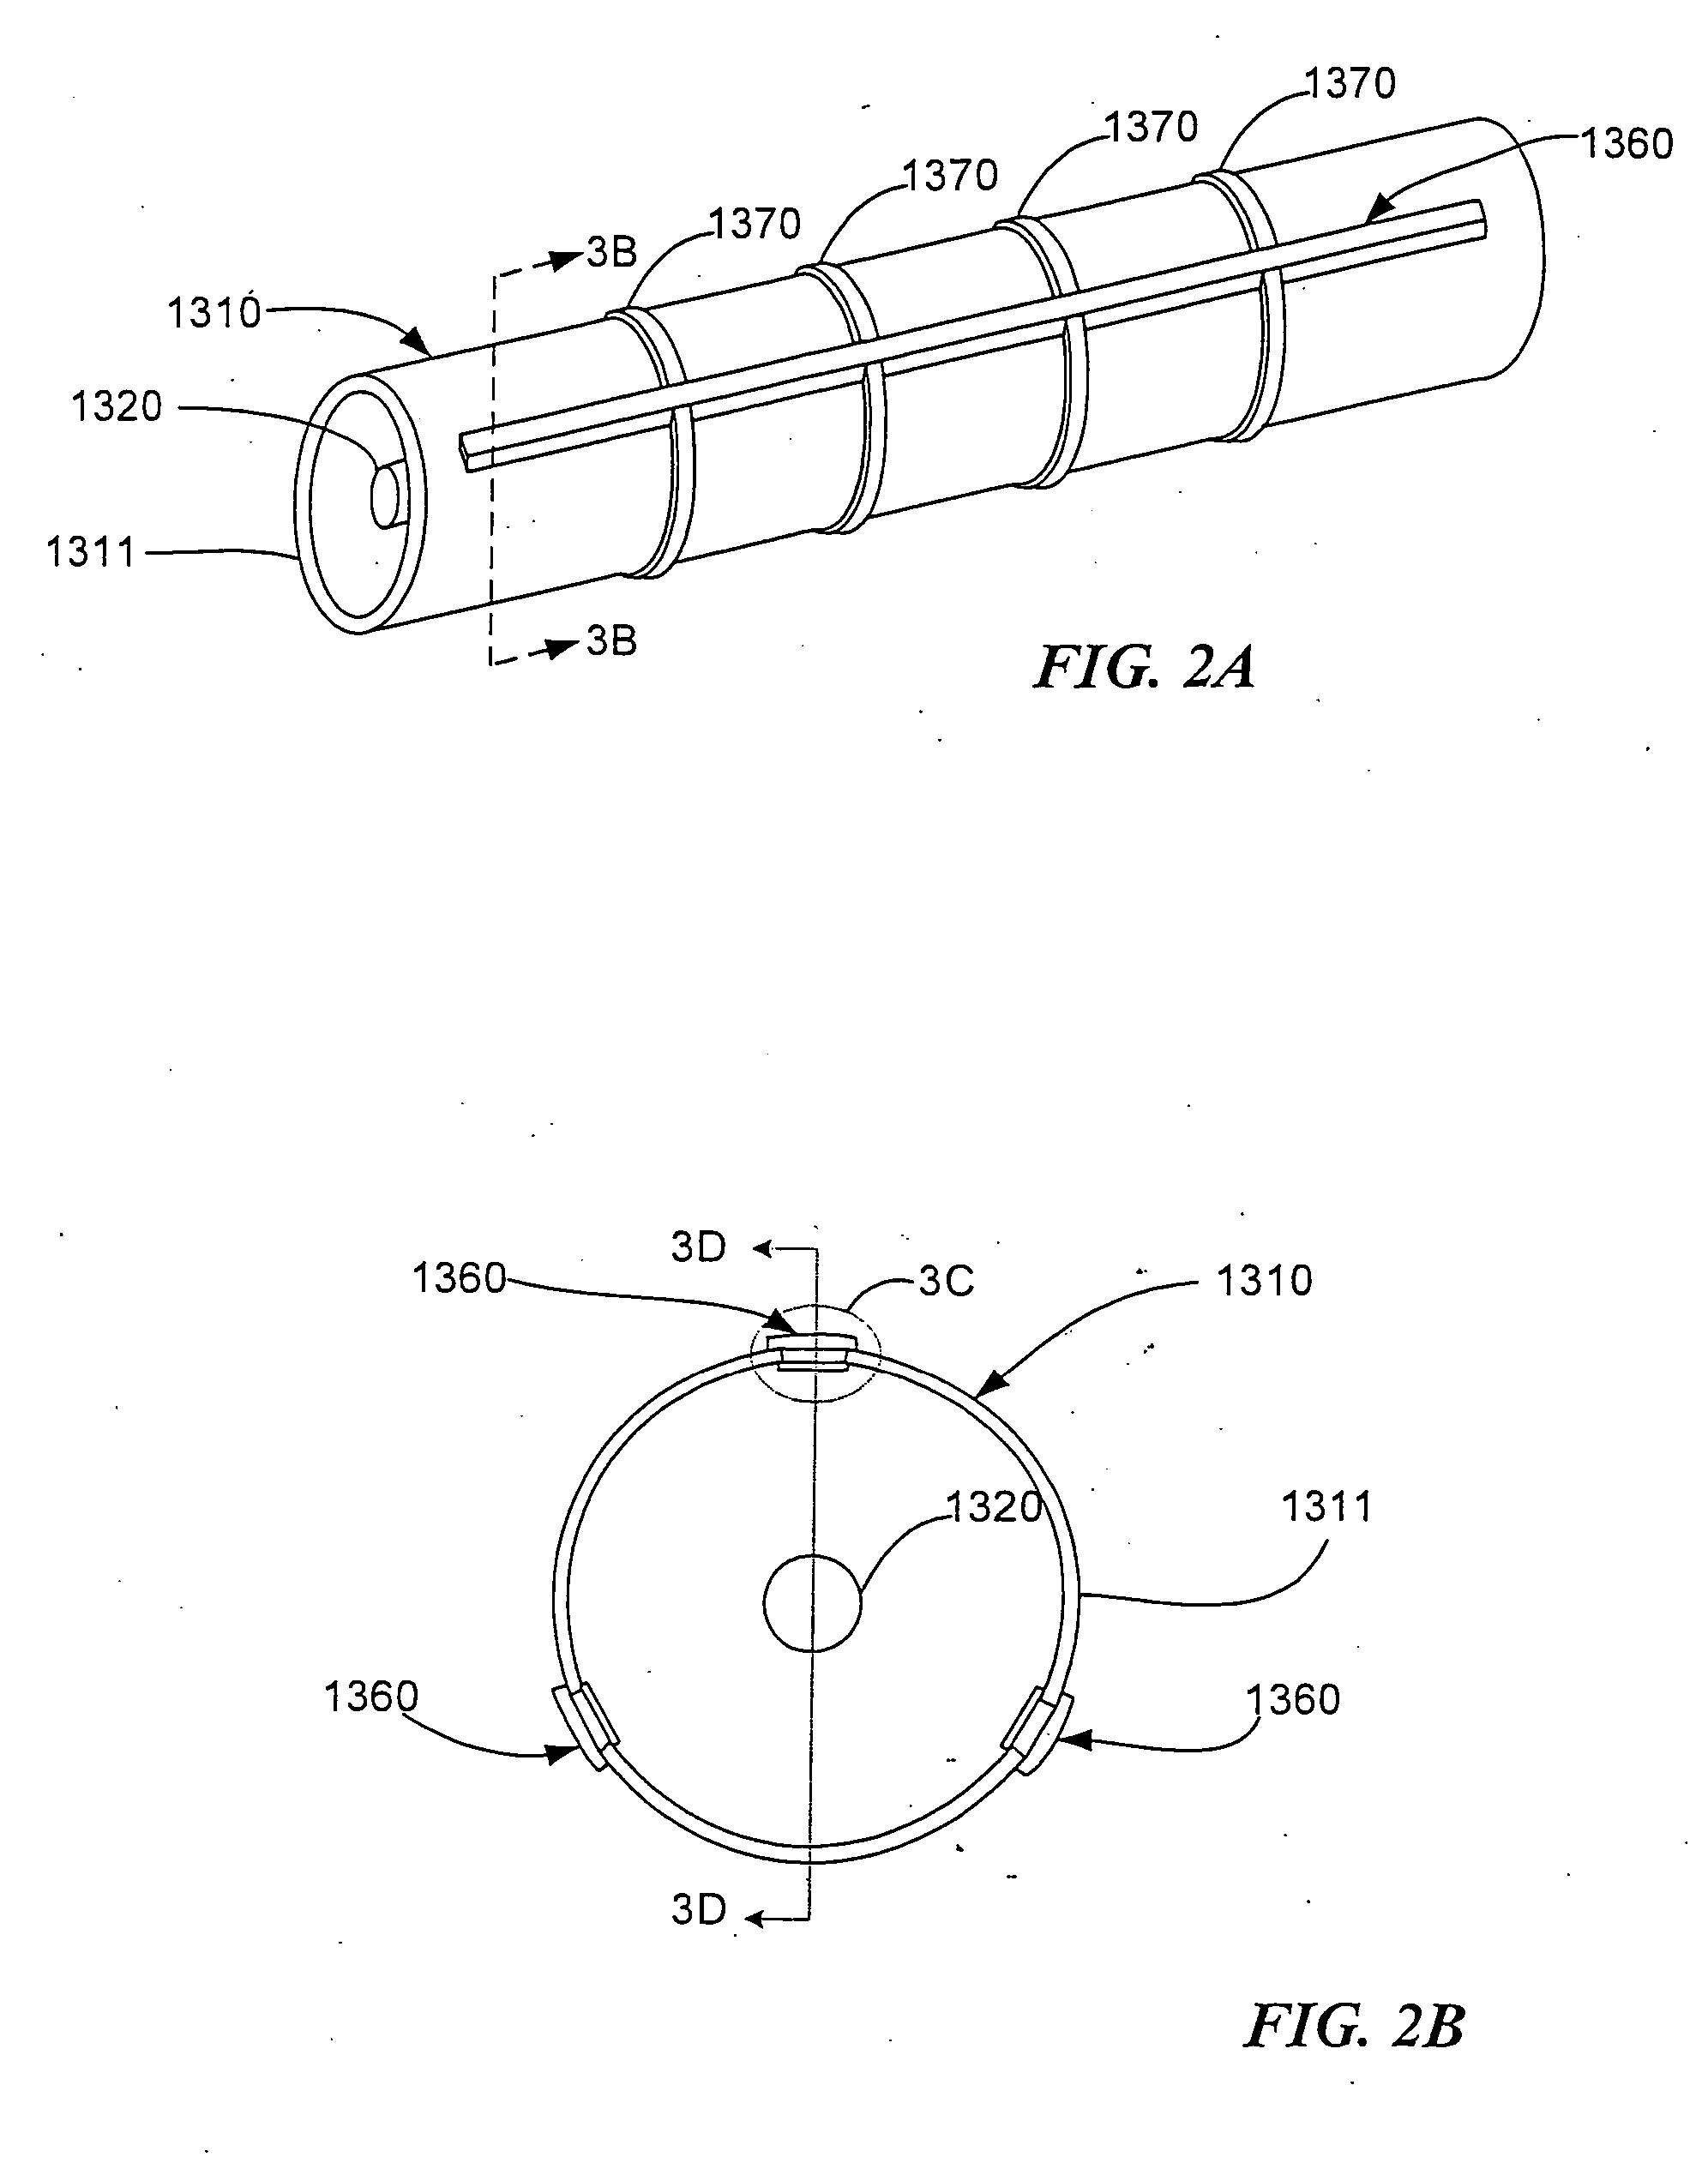 Plasma electric generation and propulsion system